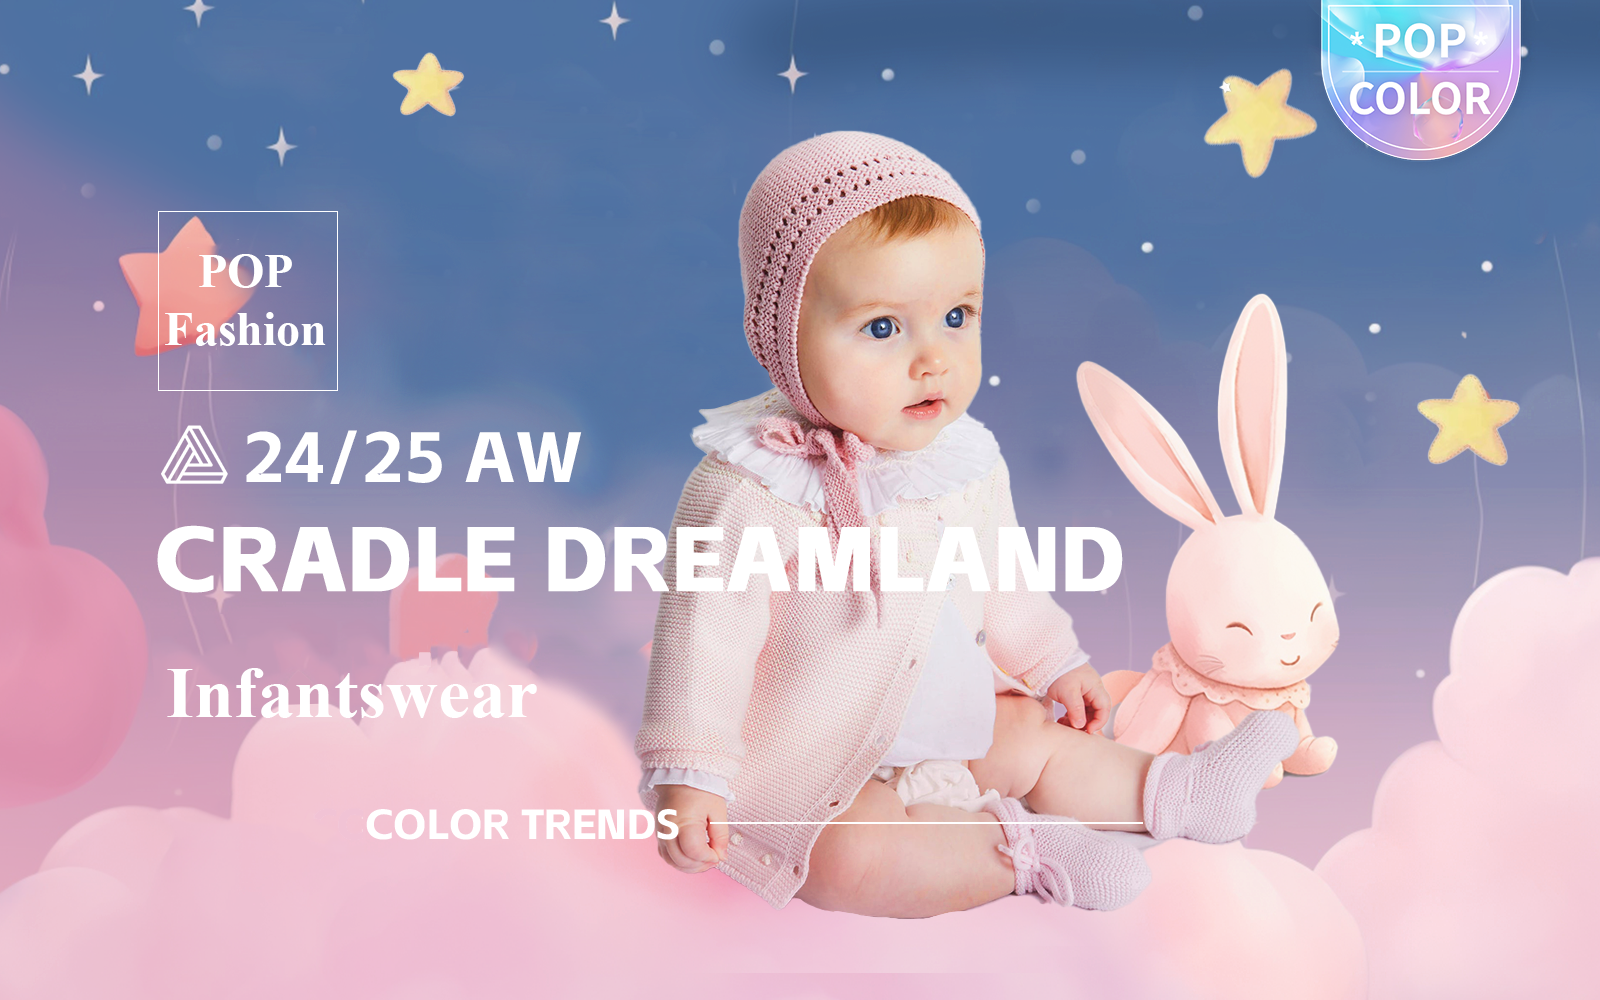 Cradle Dreamland -- A/W 24/25 Color Trend for Infantswear